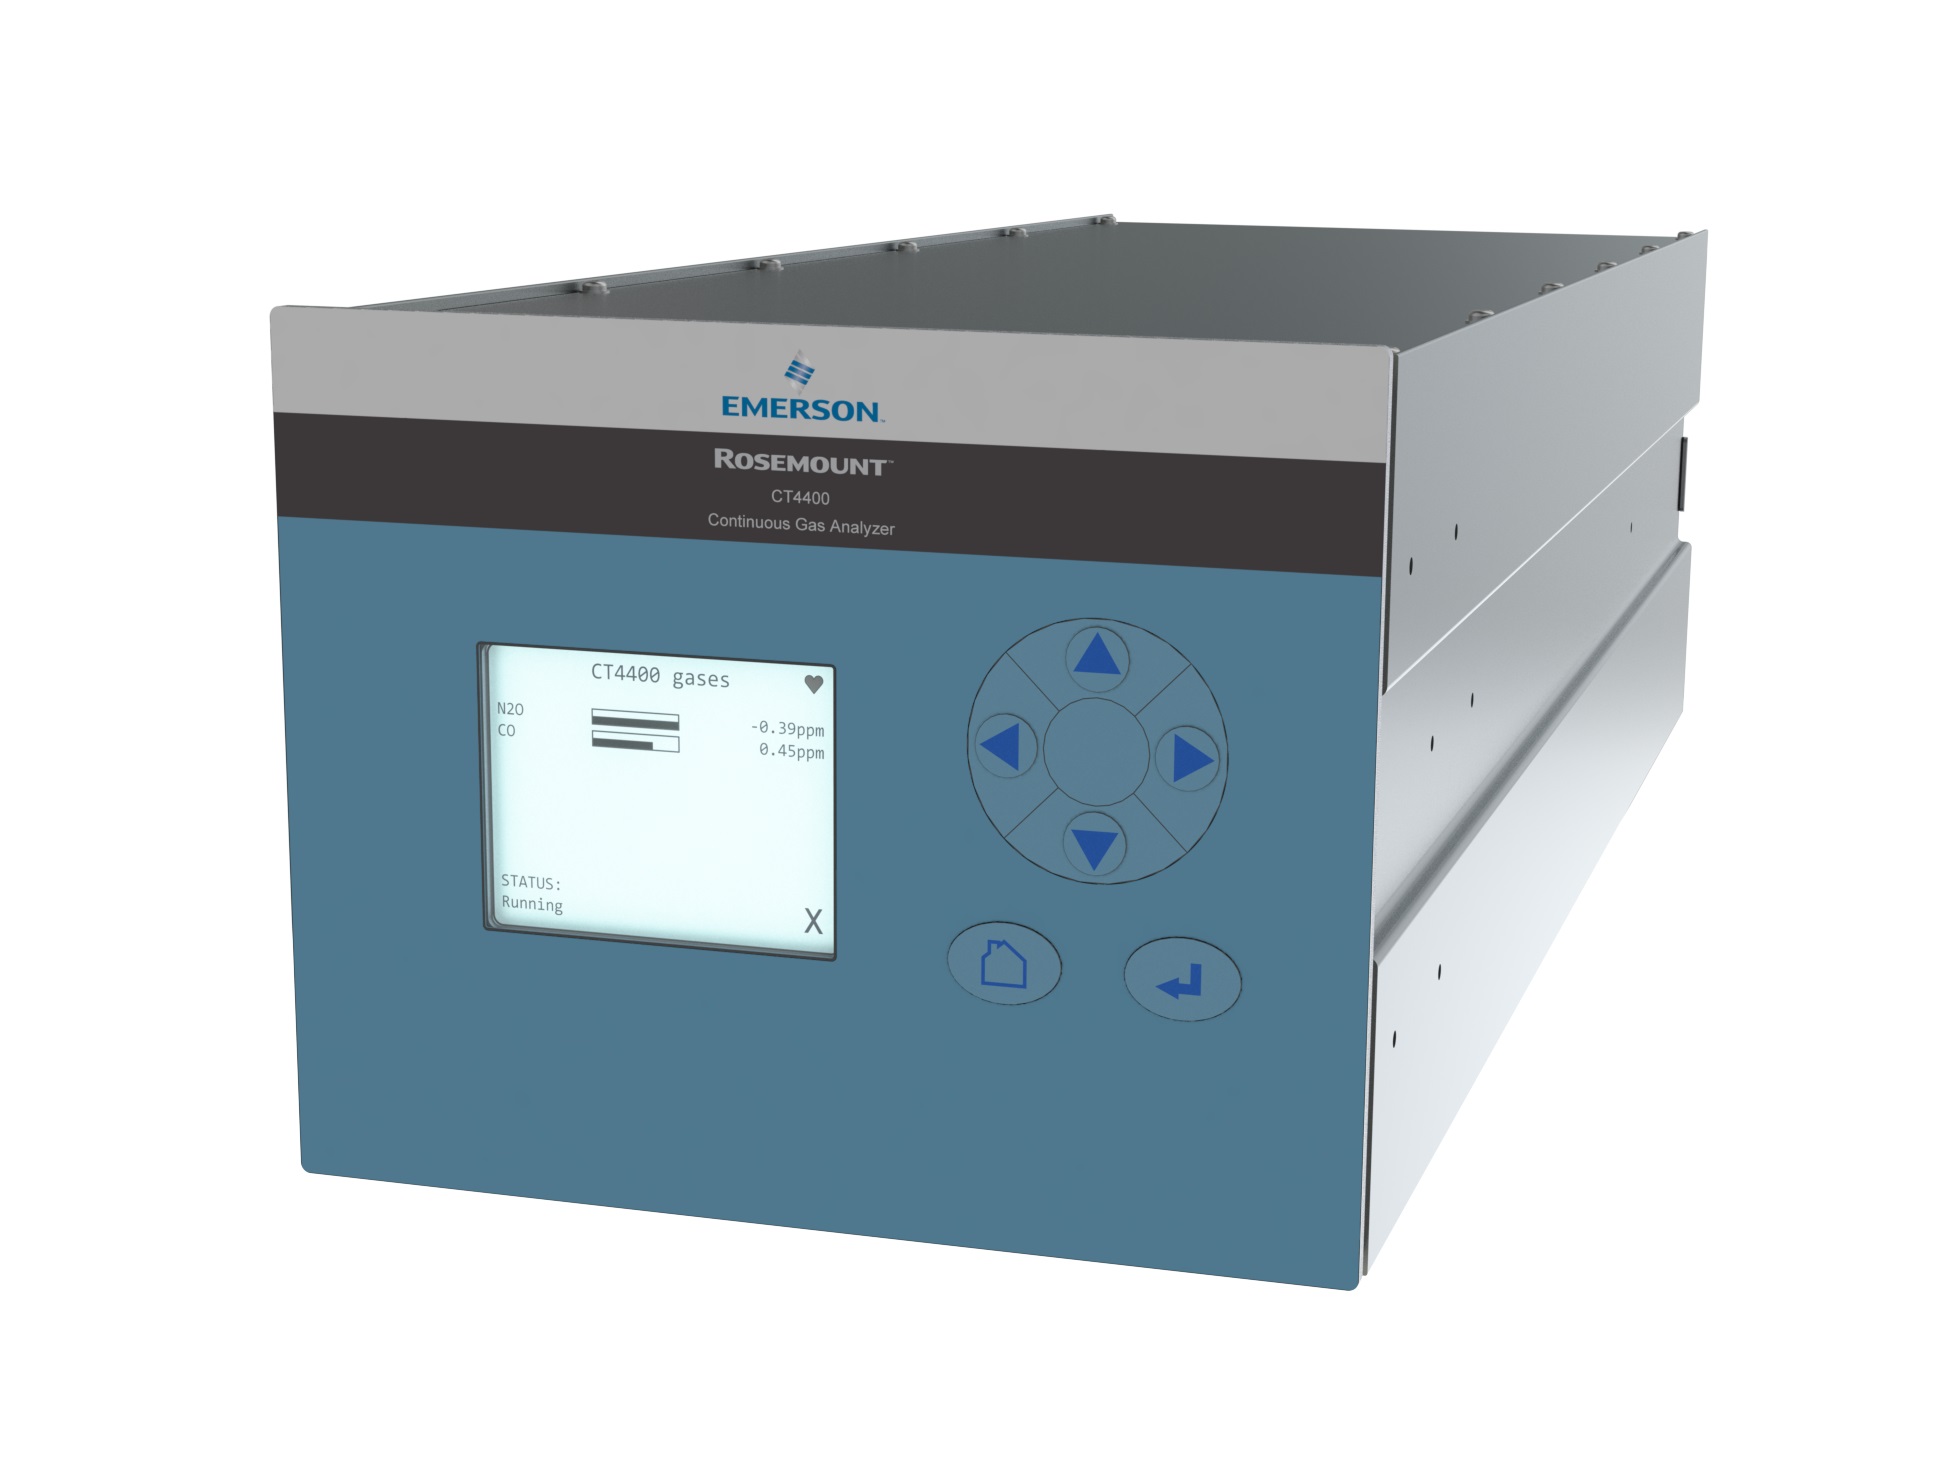 emerson’s-new-hybrid-laser-process-gas-analyzer-reduces-costs-for-continuous-emissions-monitoring-en-us-5390018